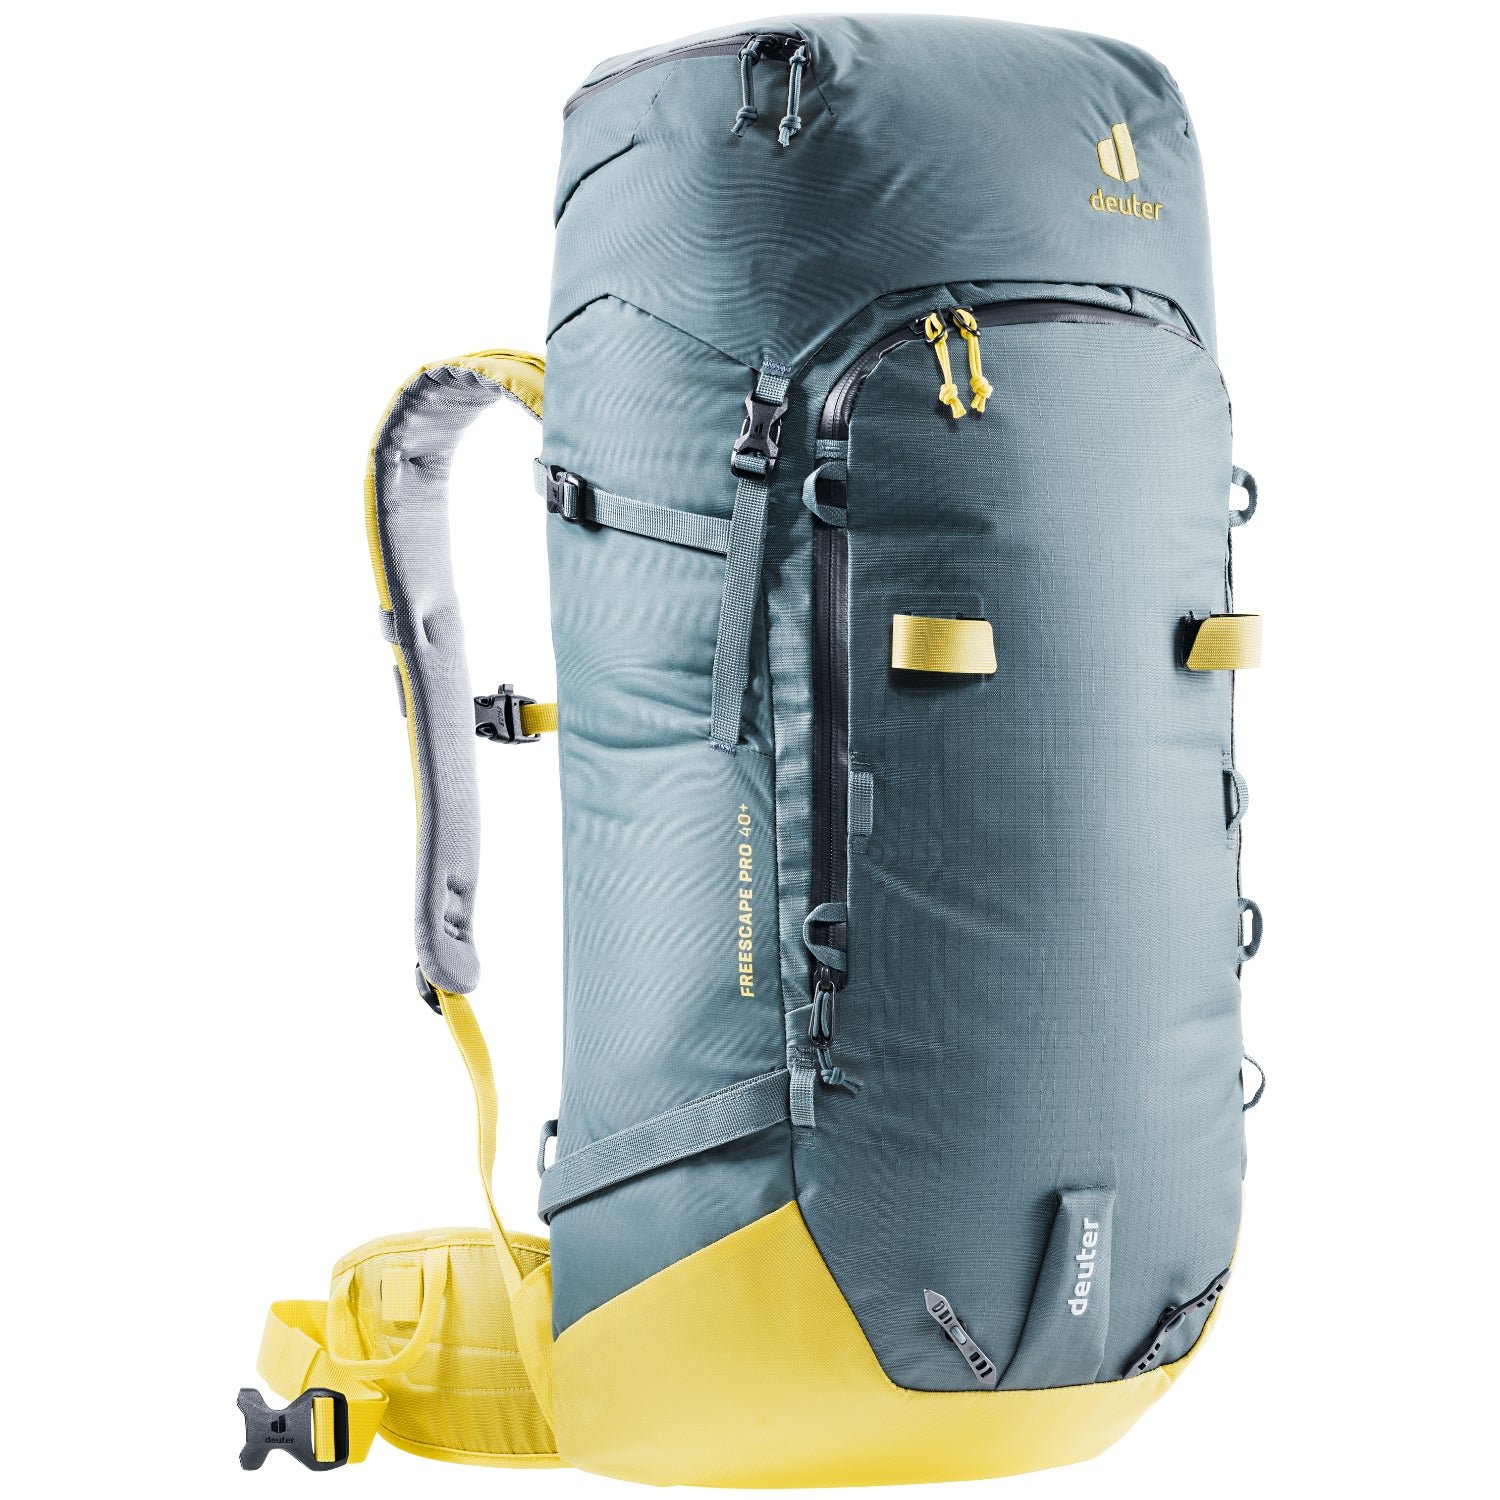 Deuter Freescape Pro 40+ rucksack in ink blue, from the front.